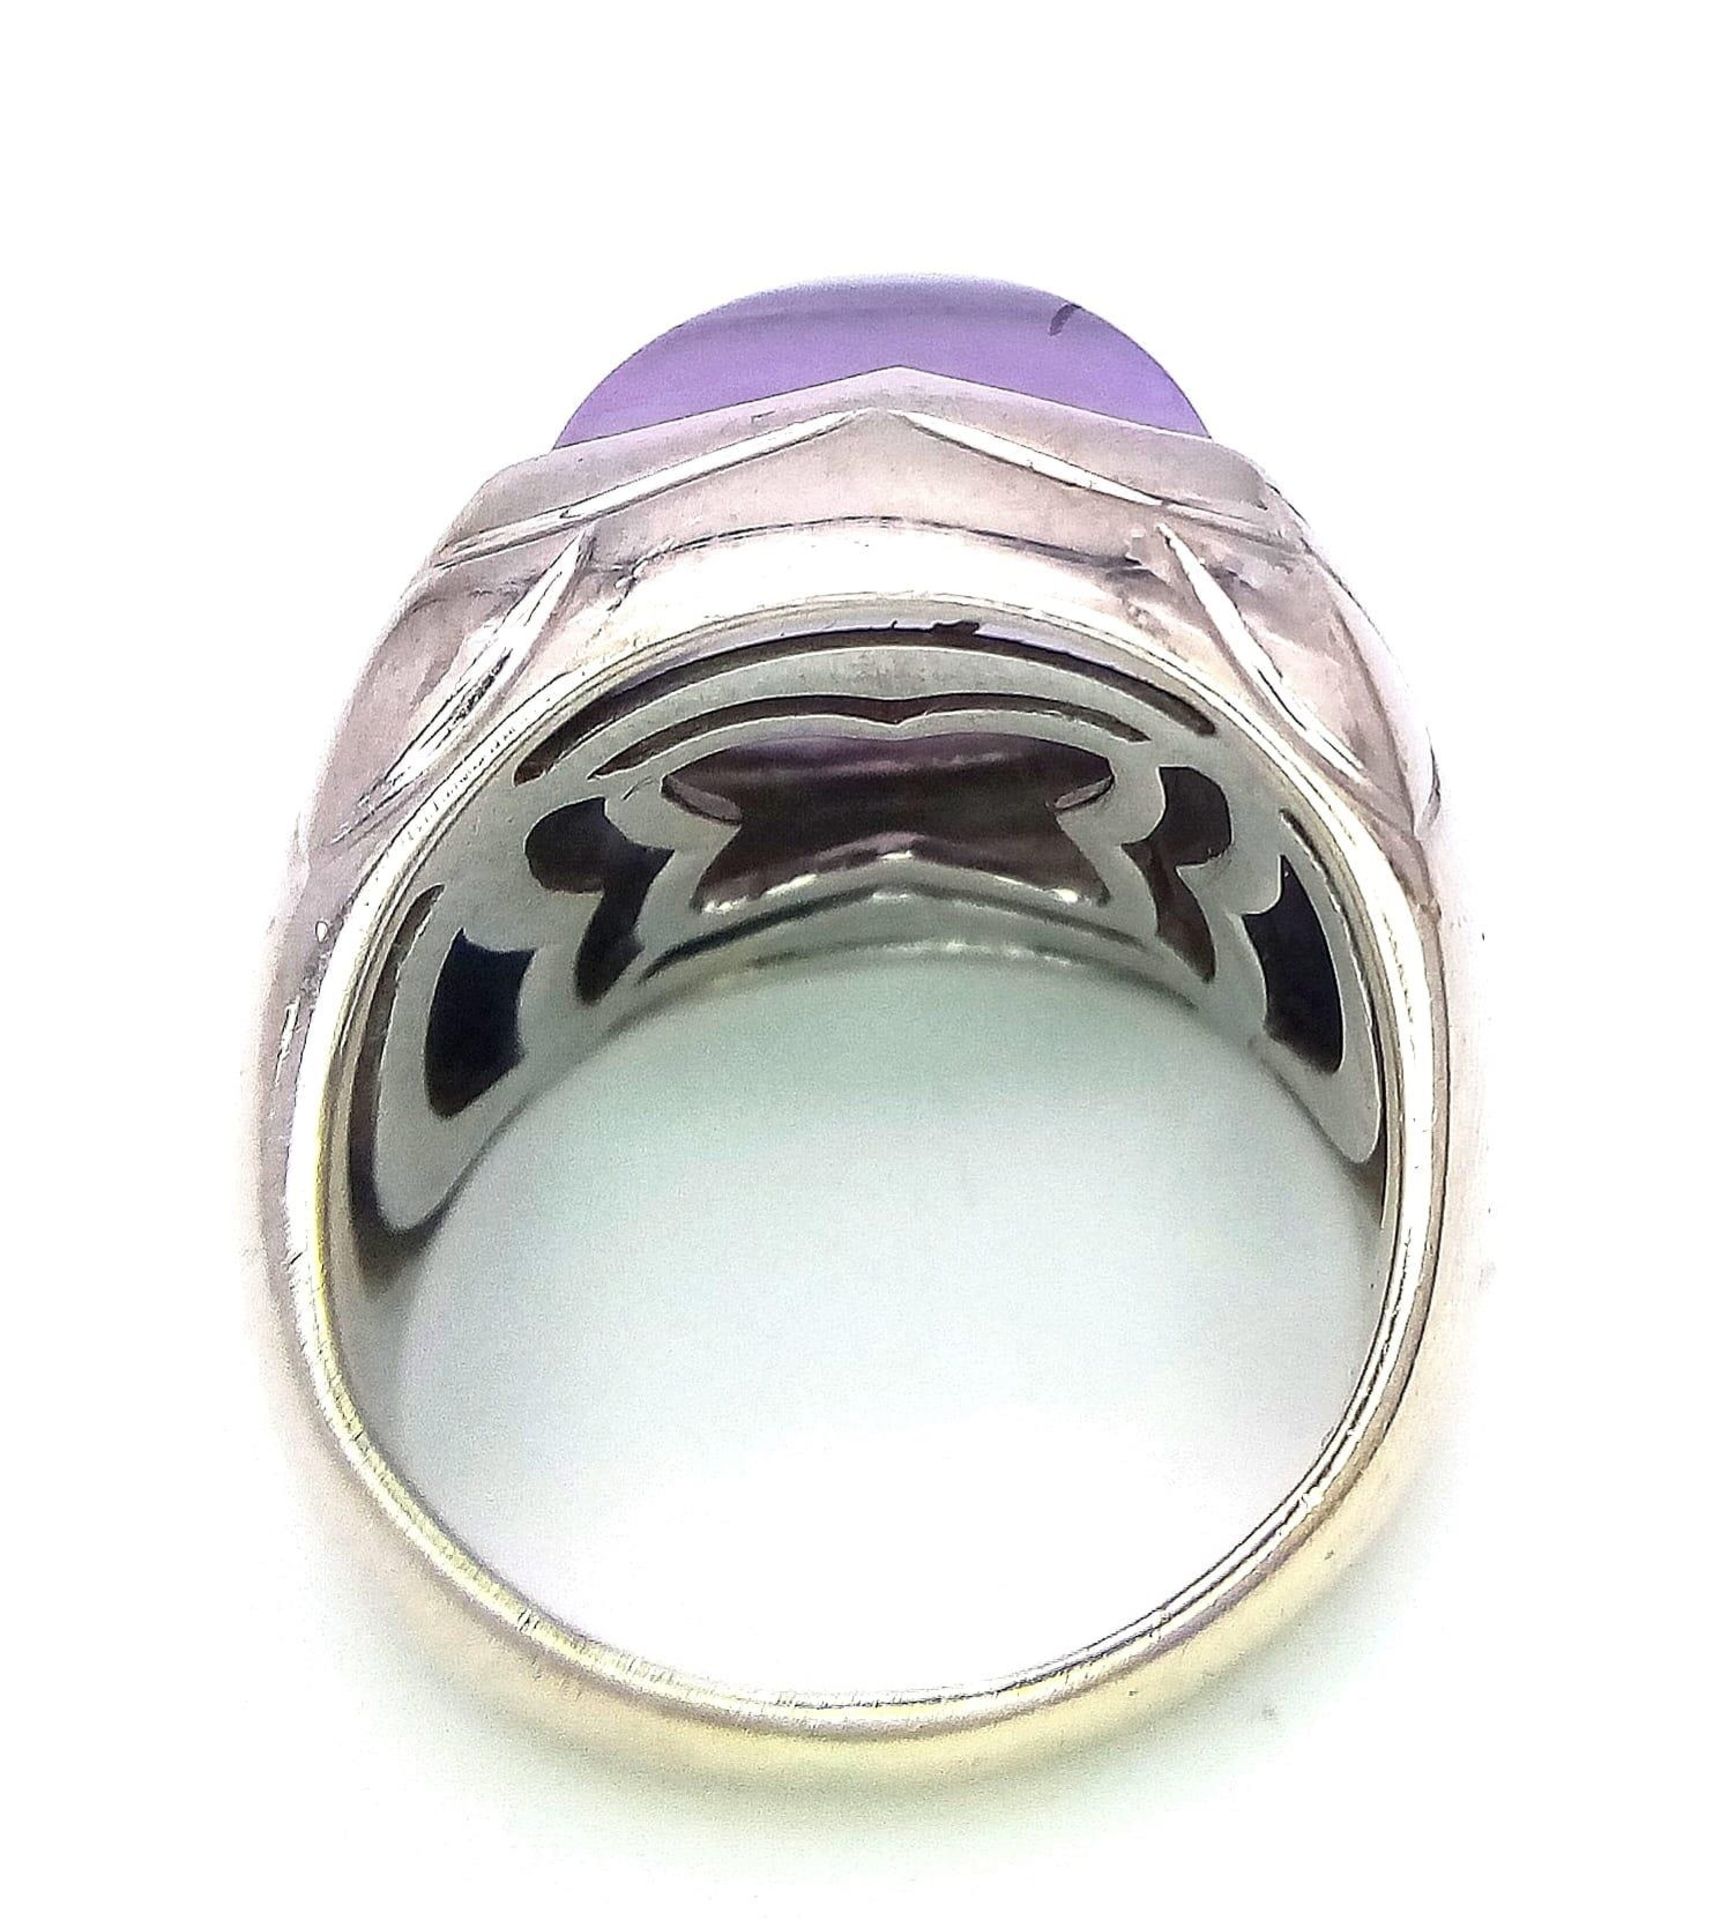 An 18K White Gold Bulgari Amethyst Pyramid Ring. Size K. 16.41g total weight. Ref: 016531 - Image 5 of 7